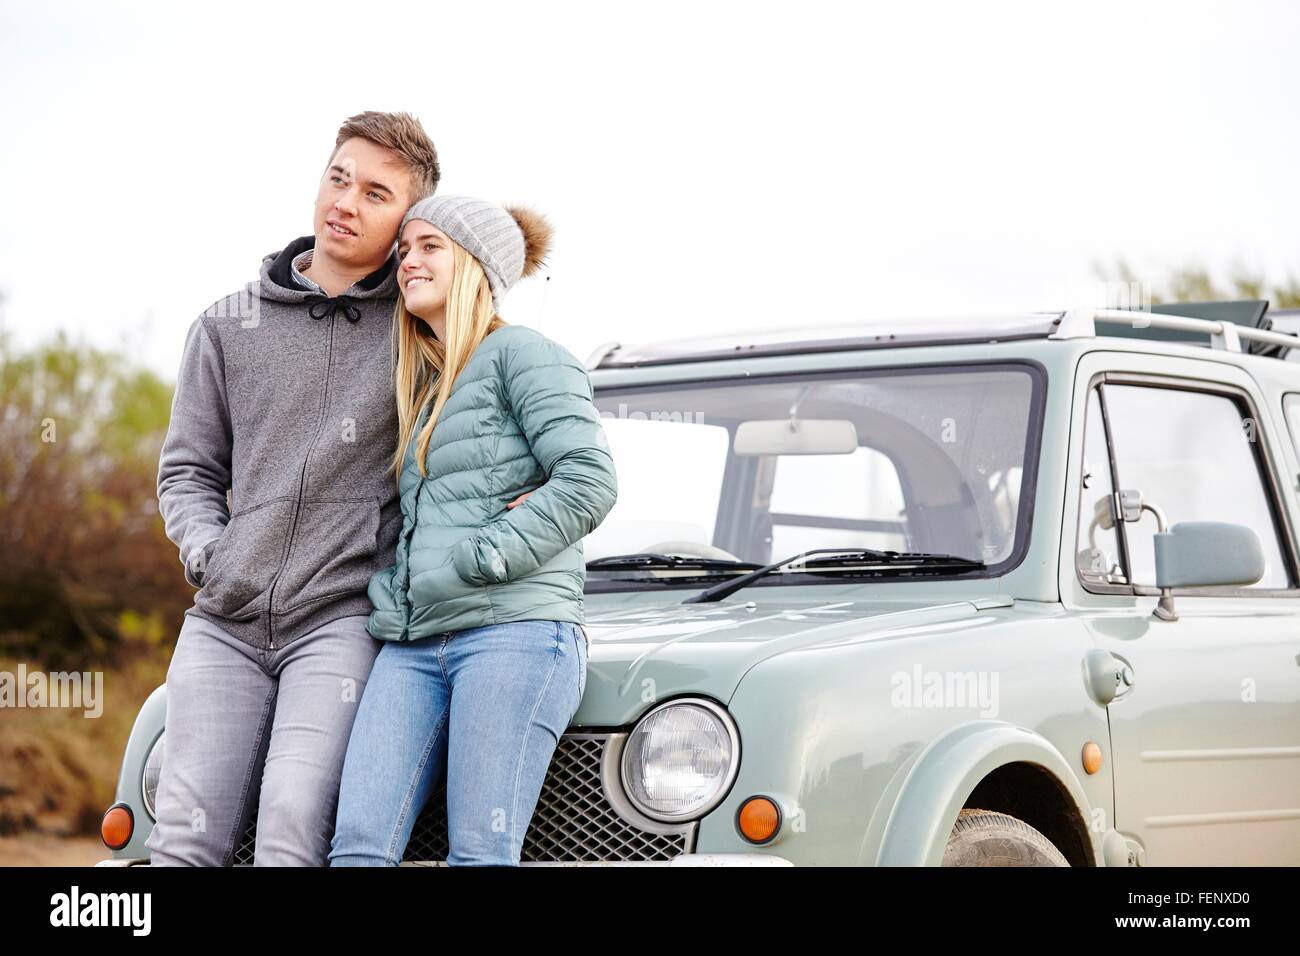 Romantic young couple leaning against car at beach Stock Photo